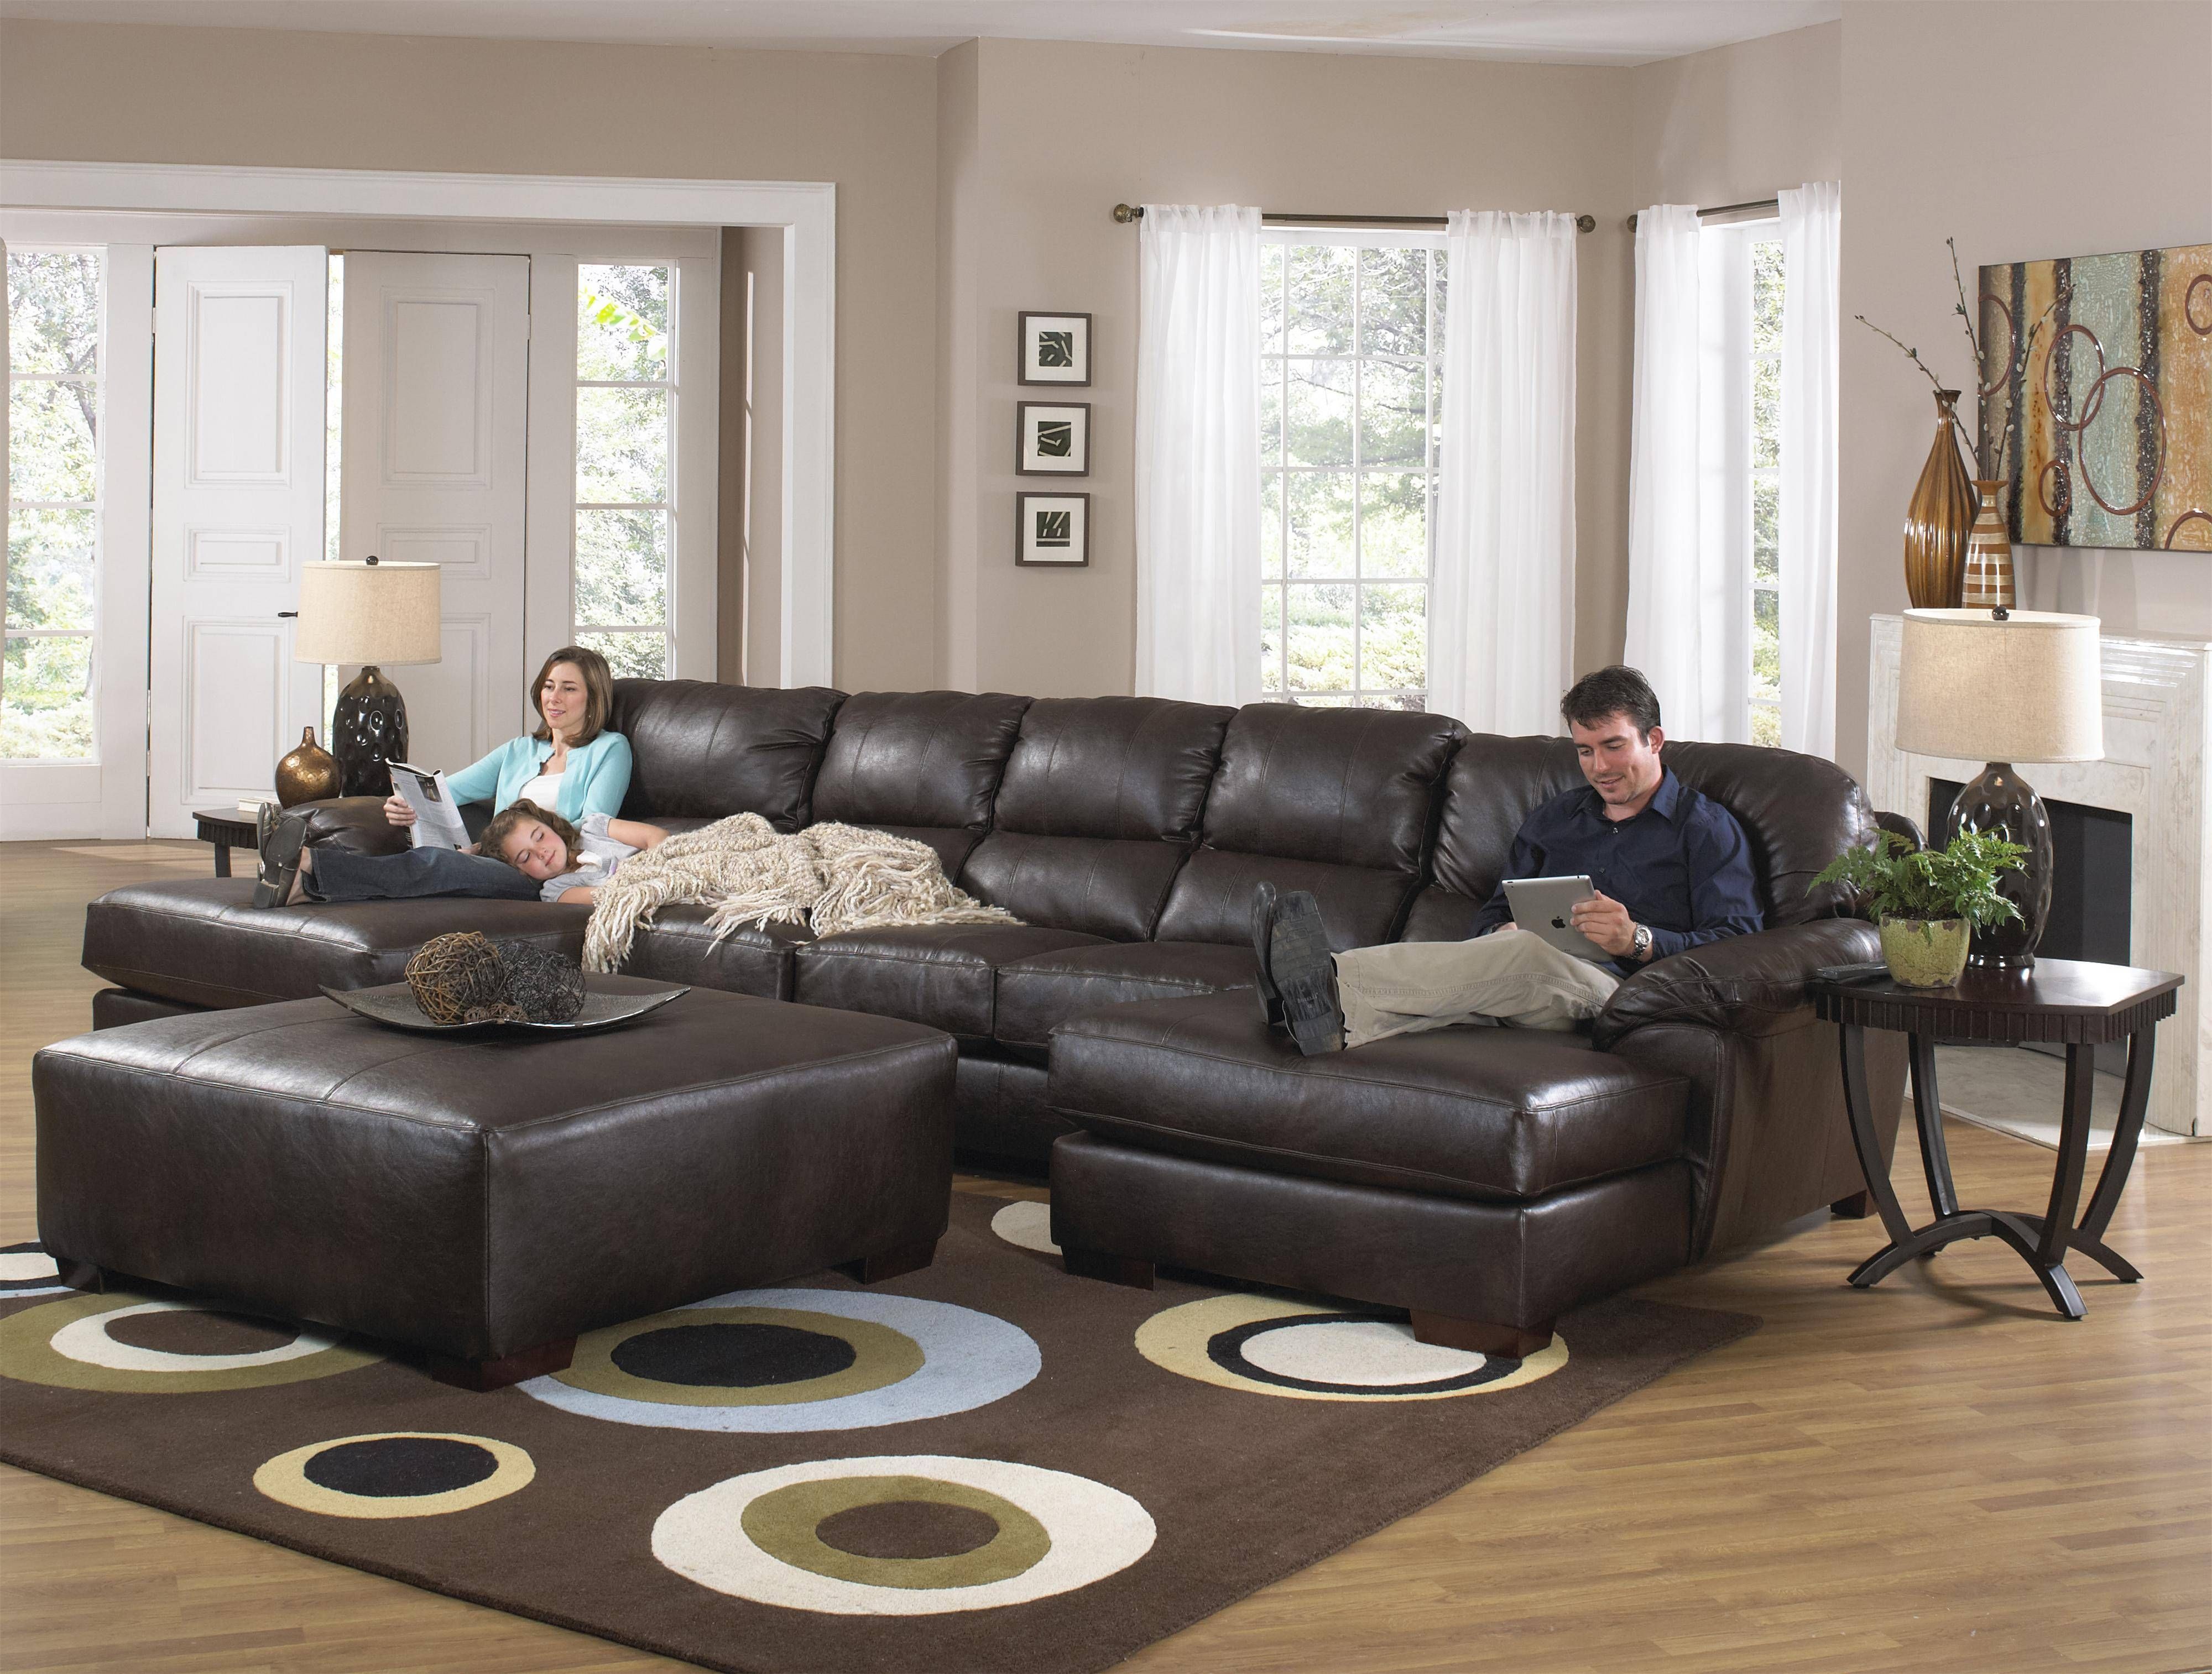 Jackson Furniture Lawson Three Seat Sectional Sofa With Console Intended For Armless Sectional Sofas (View 28 of 30)